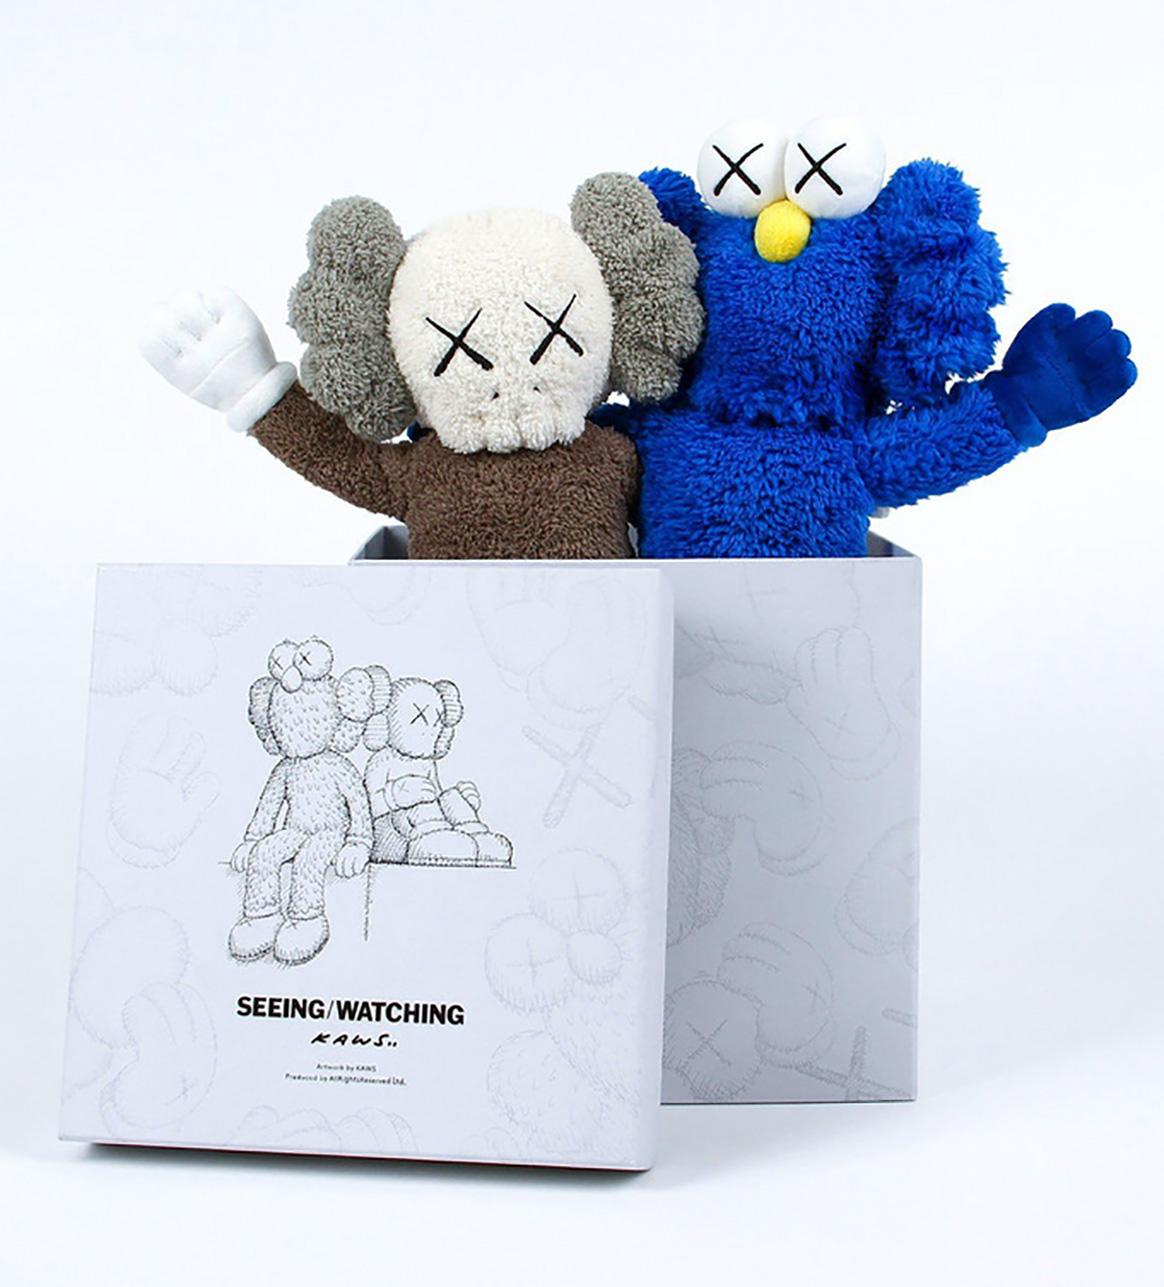 KAWS Seeing/Watching 2018 (KAWS Plush):
New in original packaging accompanied by a numbered tag. Released in conjunction with the installation of the KAWS Seeing/Watching sculpture in Hunan, China. The plush figurines feature the well known